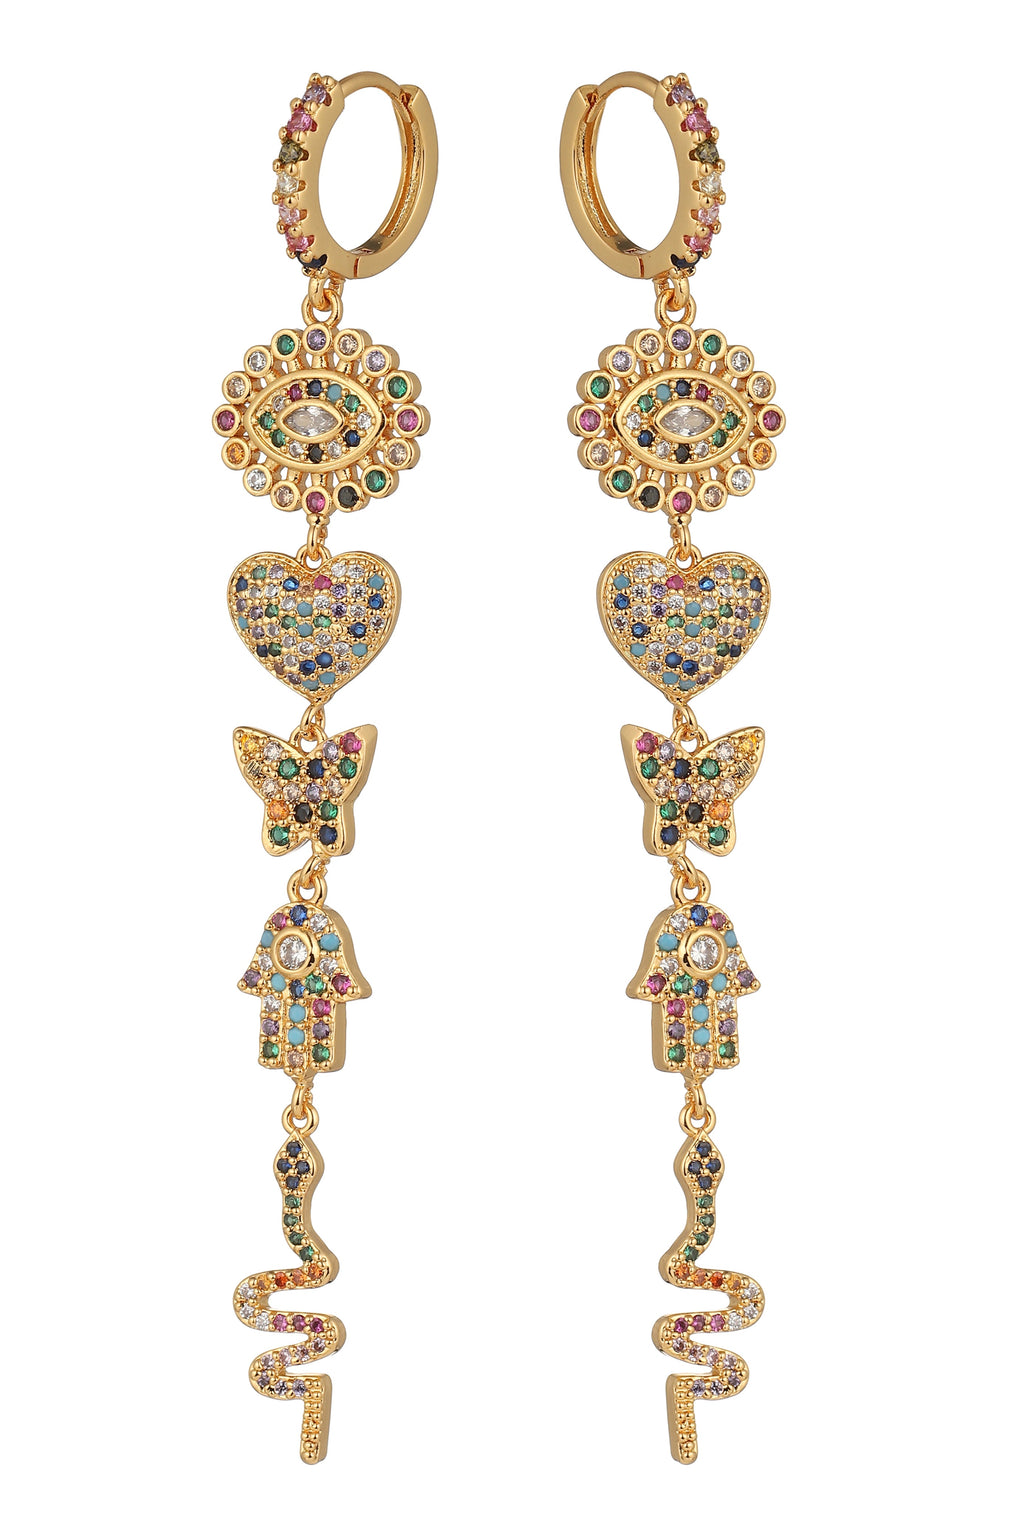 Andrea 18K Gold Plated Motif Earrings Adorned with Cubic Zirconia for Effortless Elegance